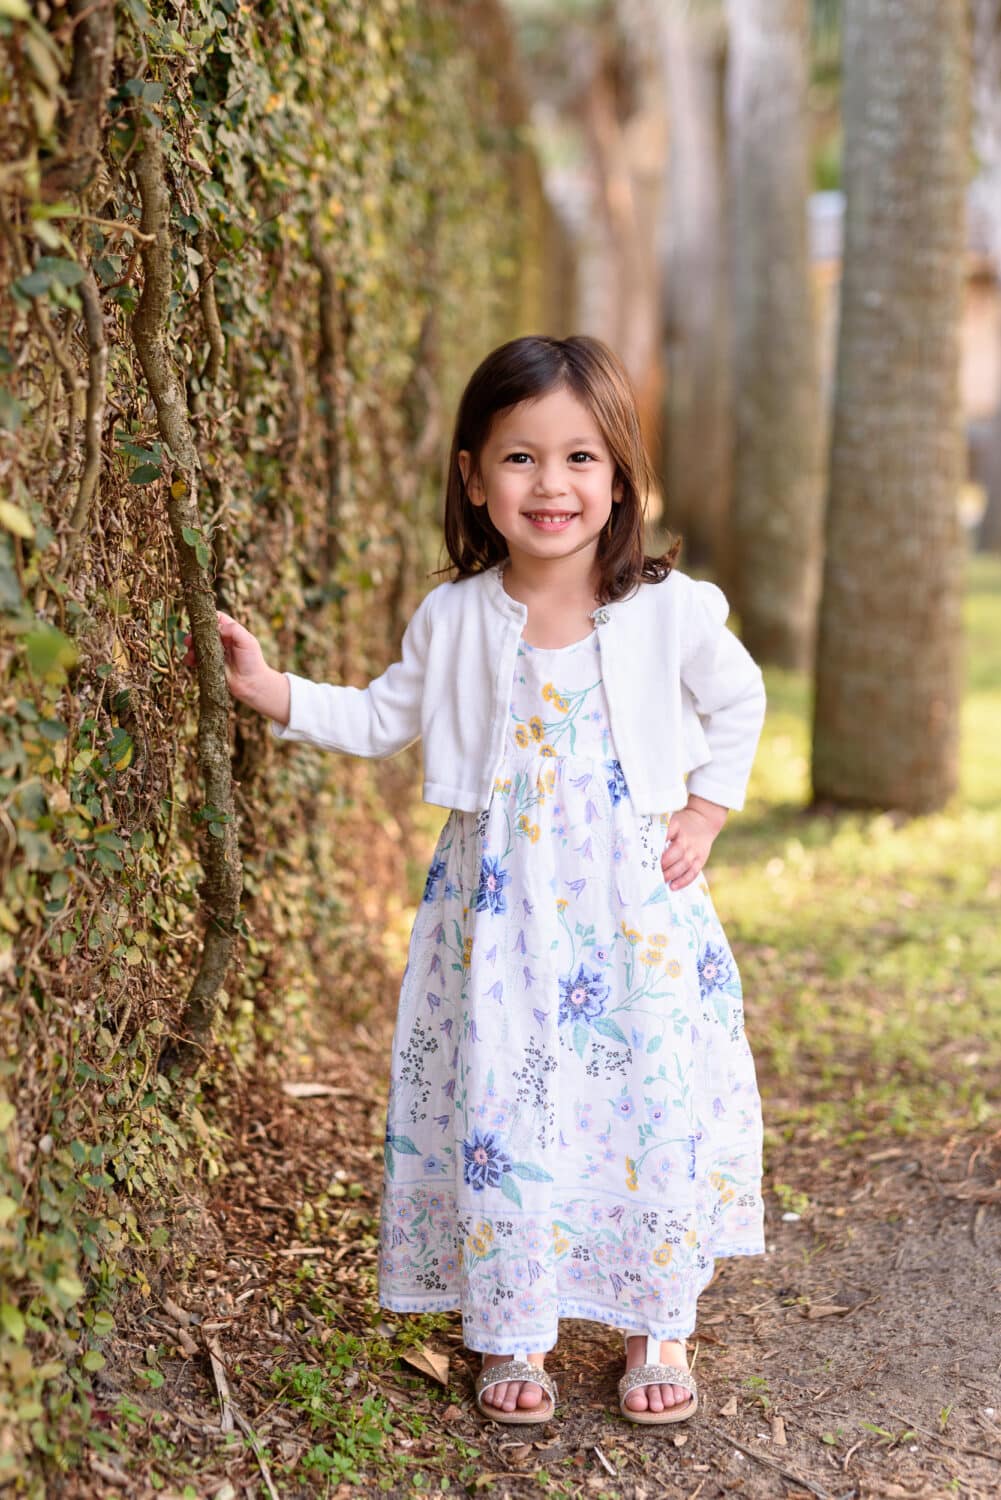 Little girl leaning against the ivy wall - Atalaya Castle